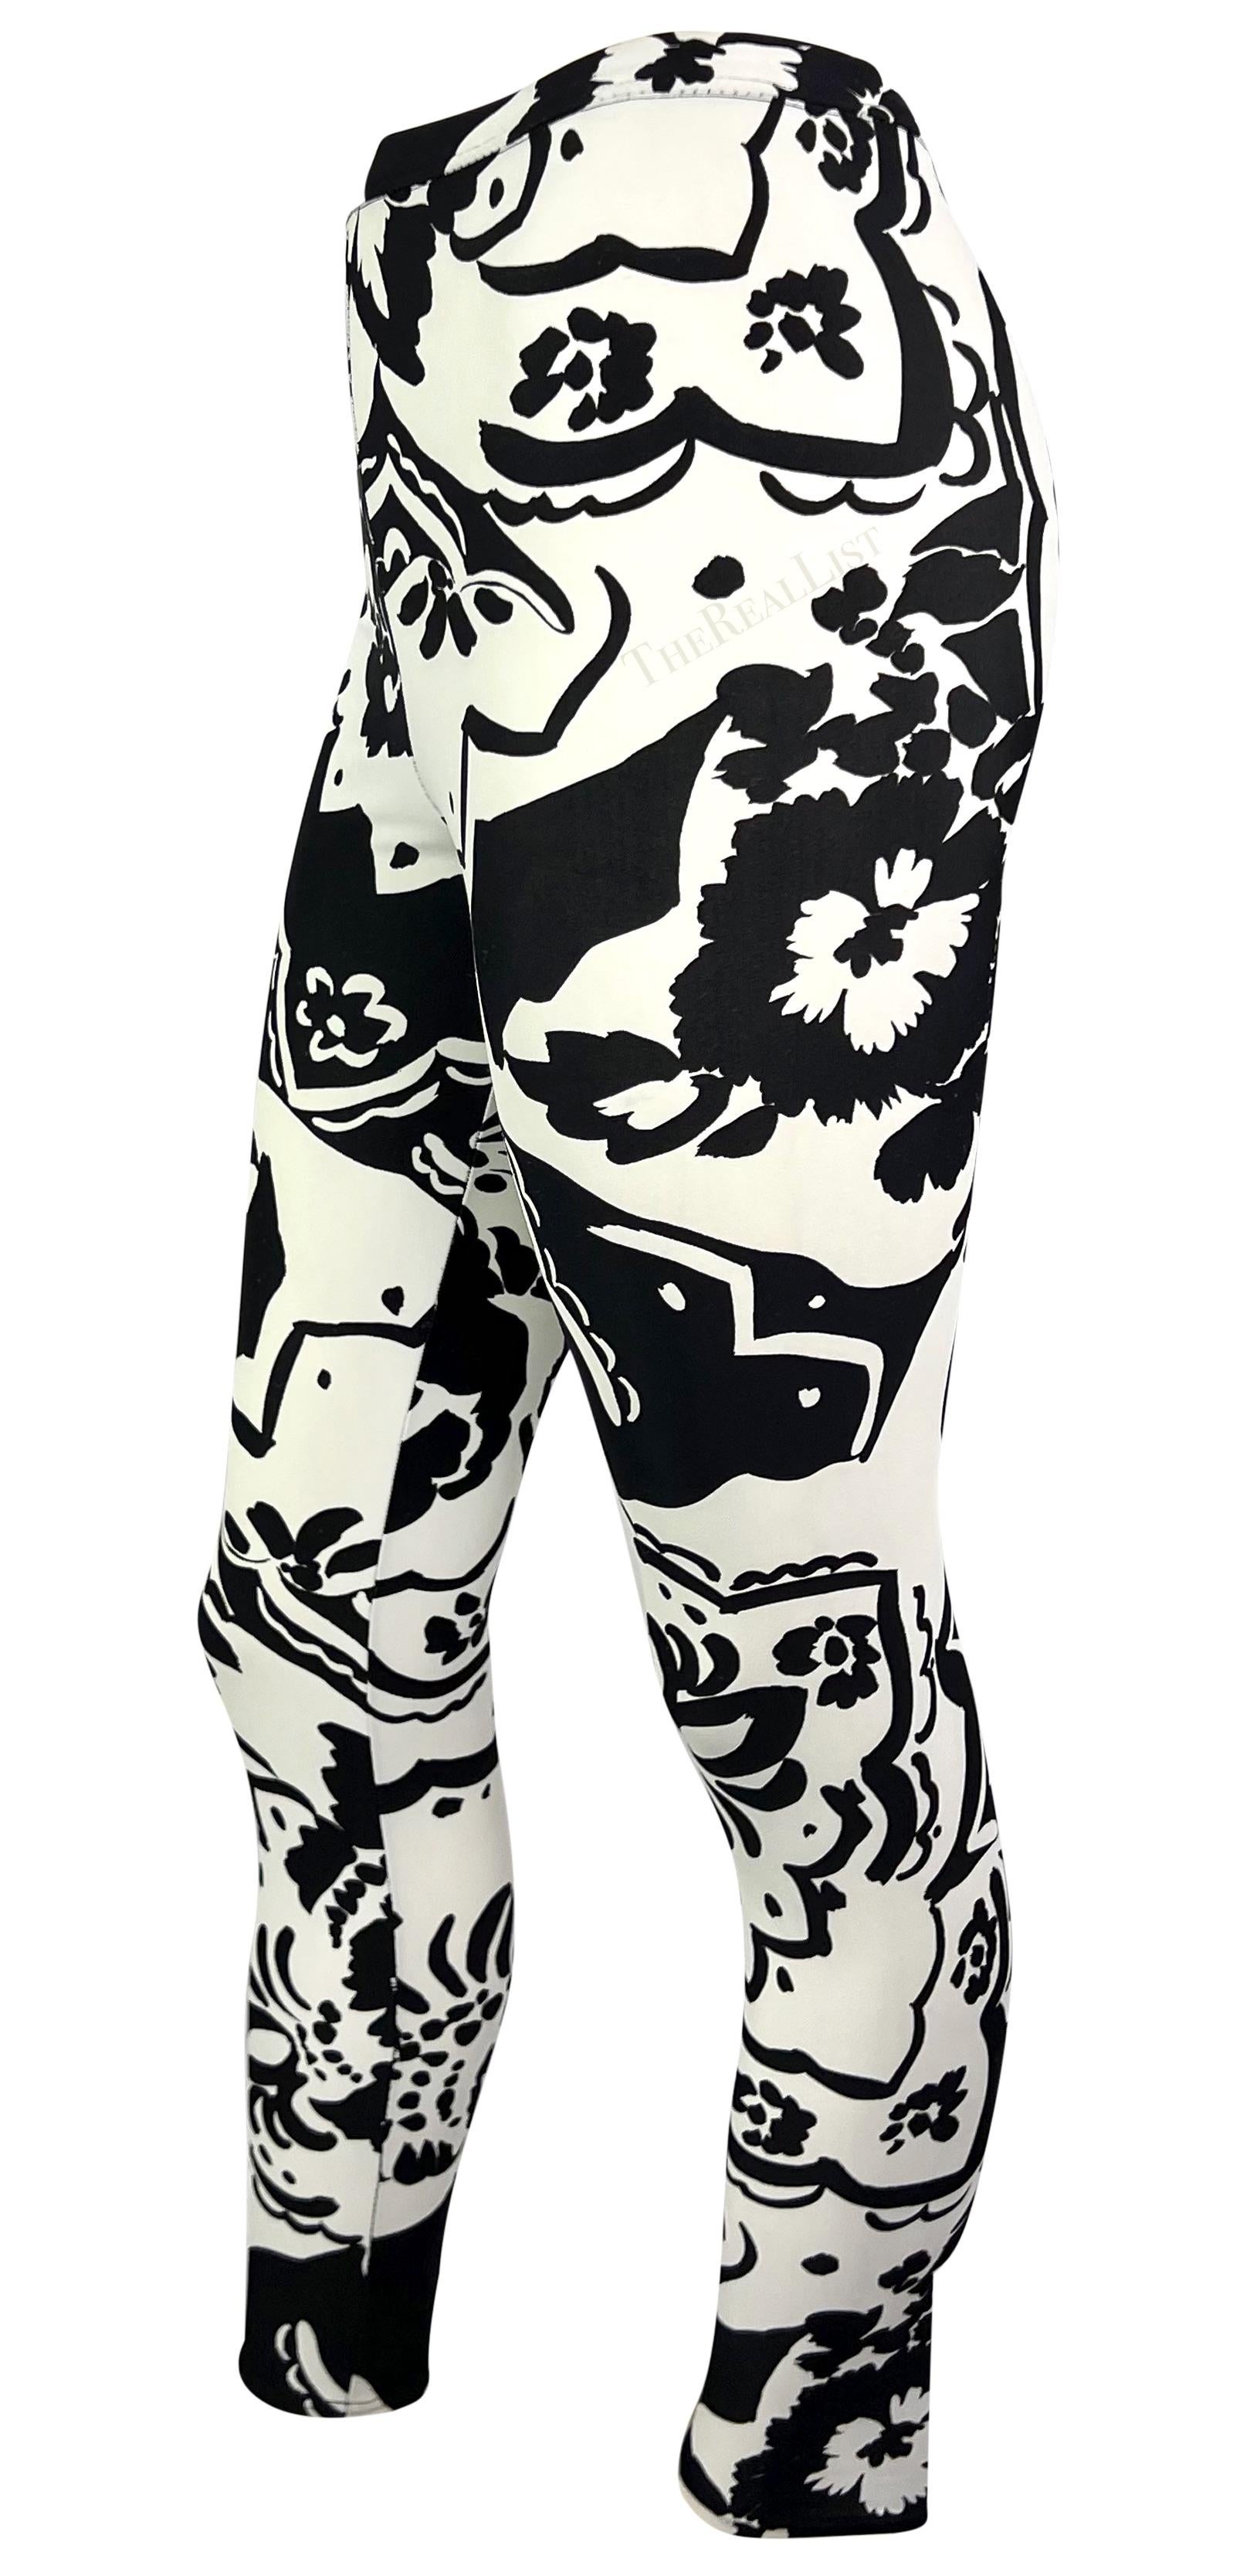 1990 Gianni Versace Black White Abstract Floral Leggings Tights In Excellent Condition For Sale In West Hollywood, CA